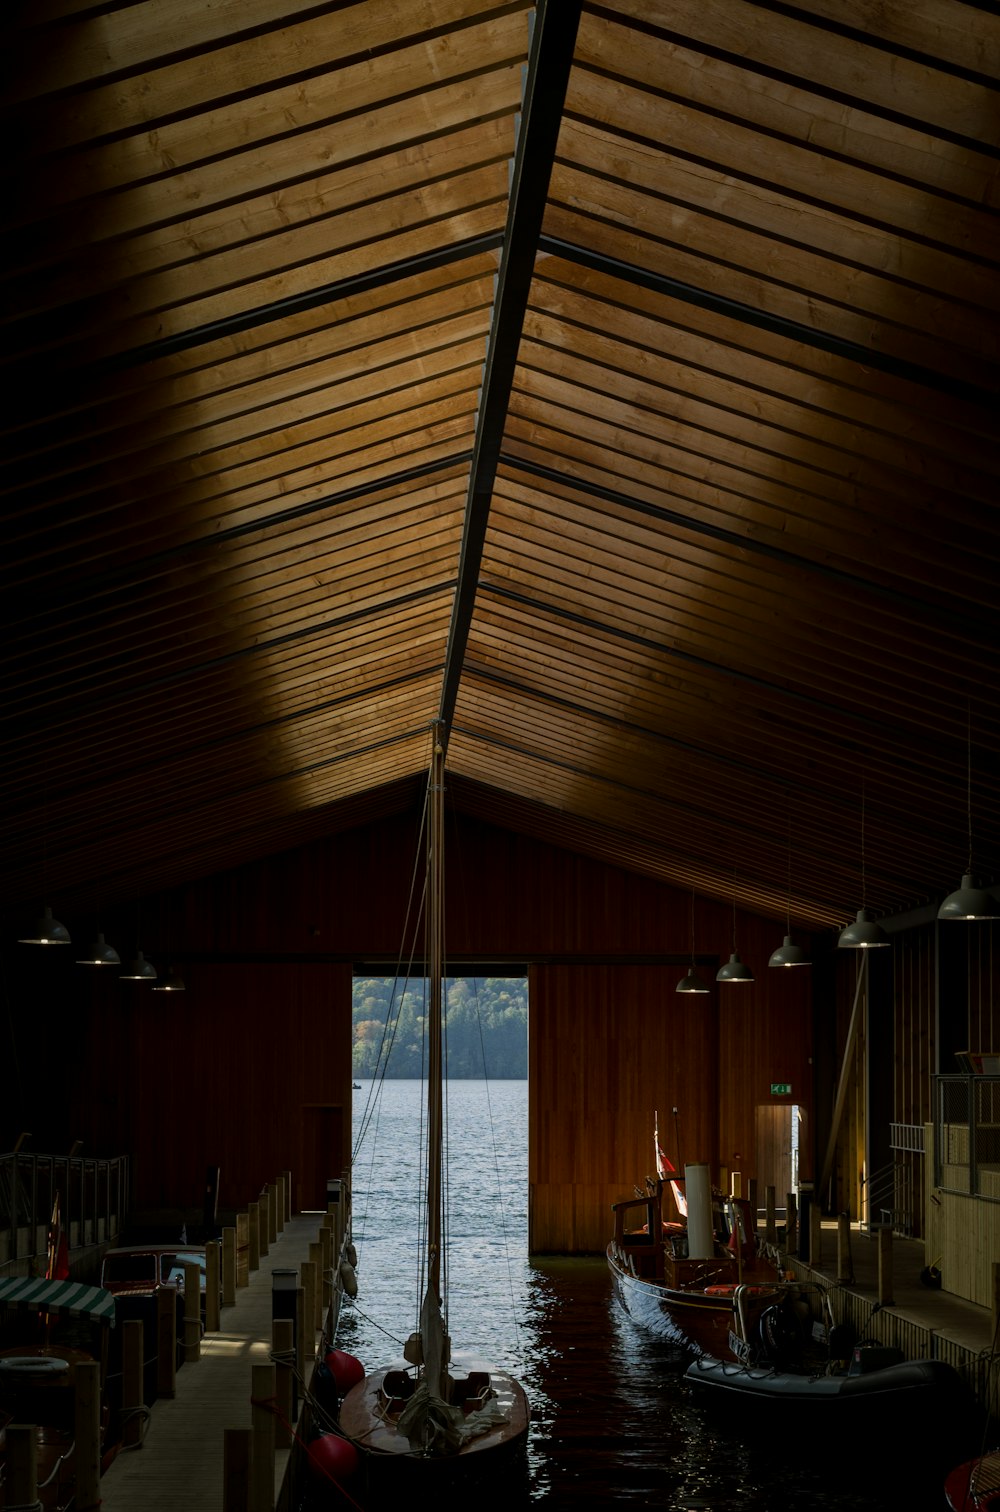 a boat sits in the water under a wooden roof